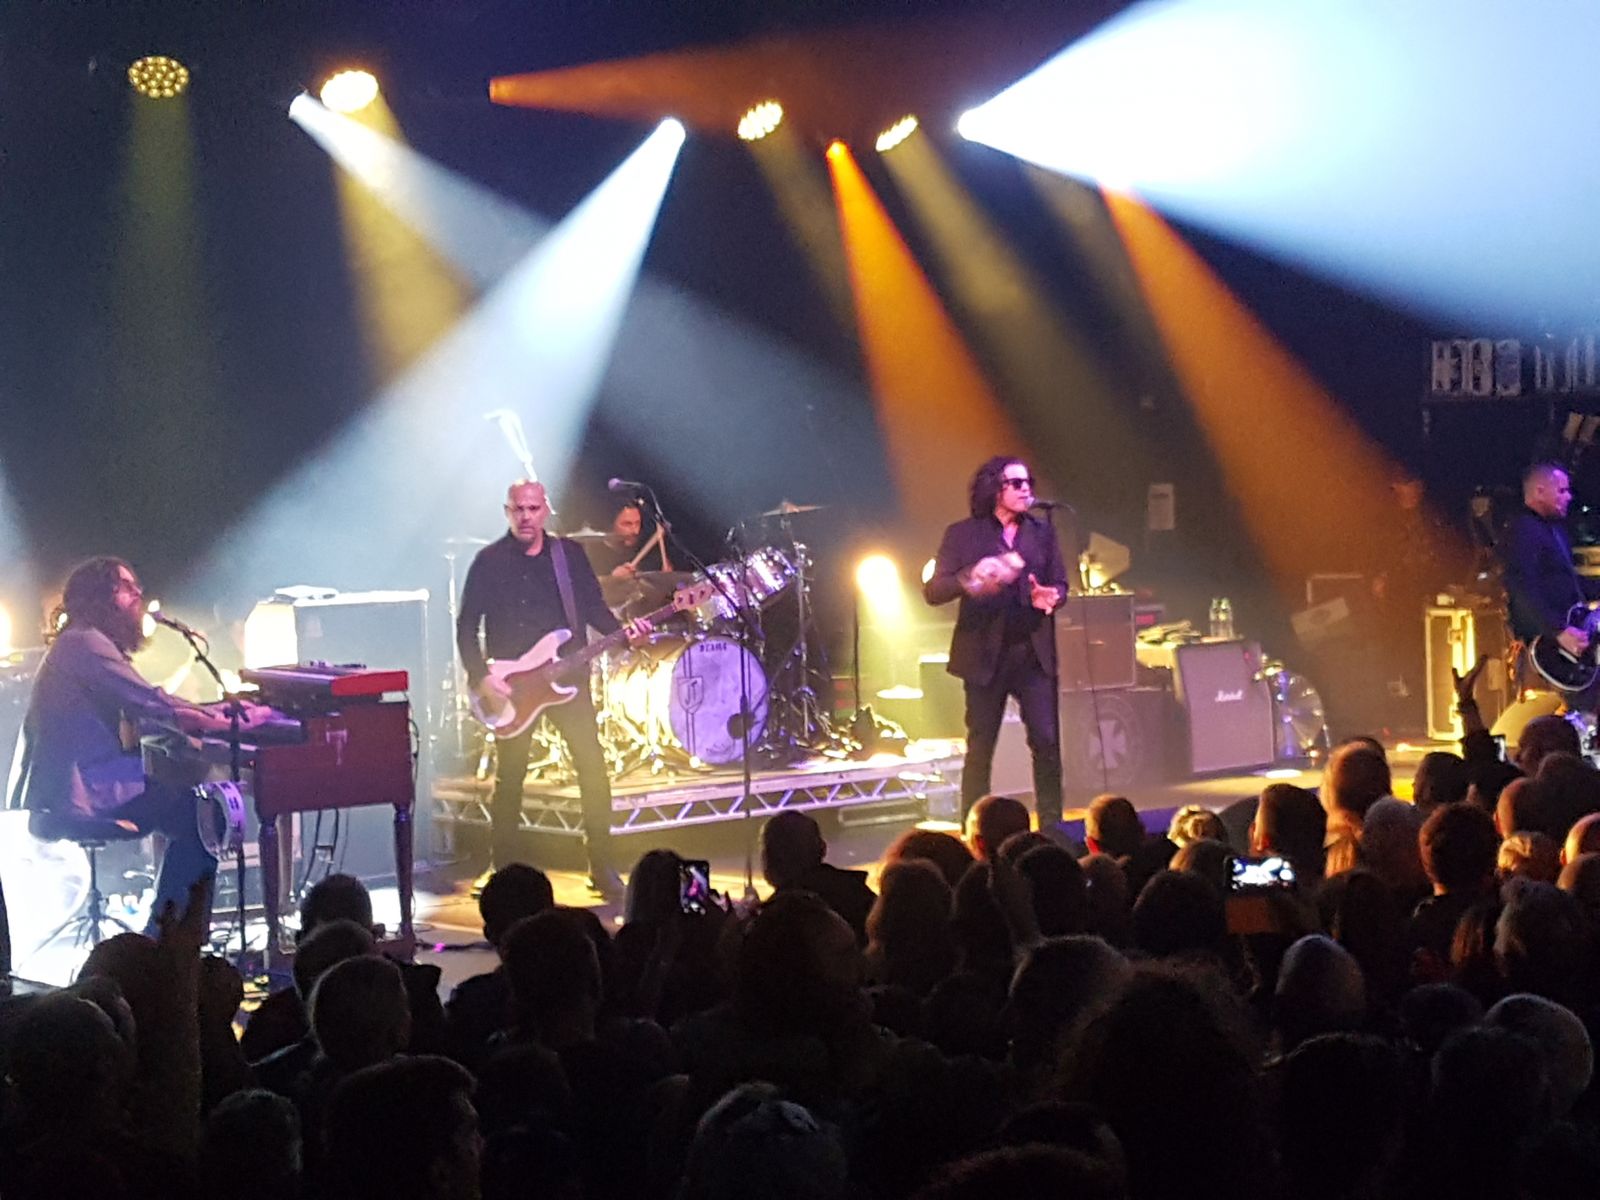 The Cult play a sold-out show in Bristol